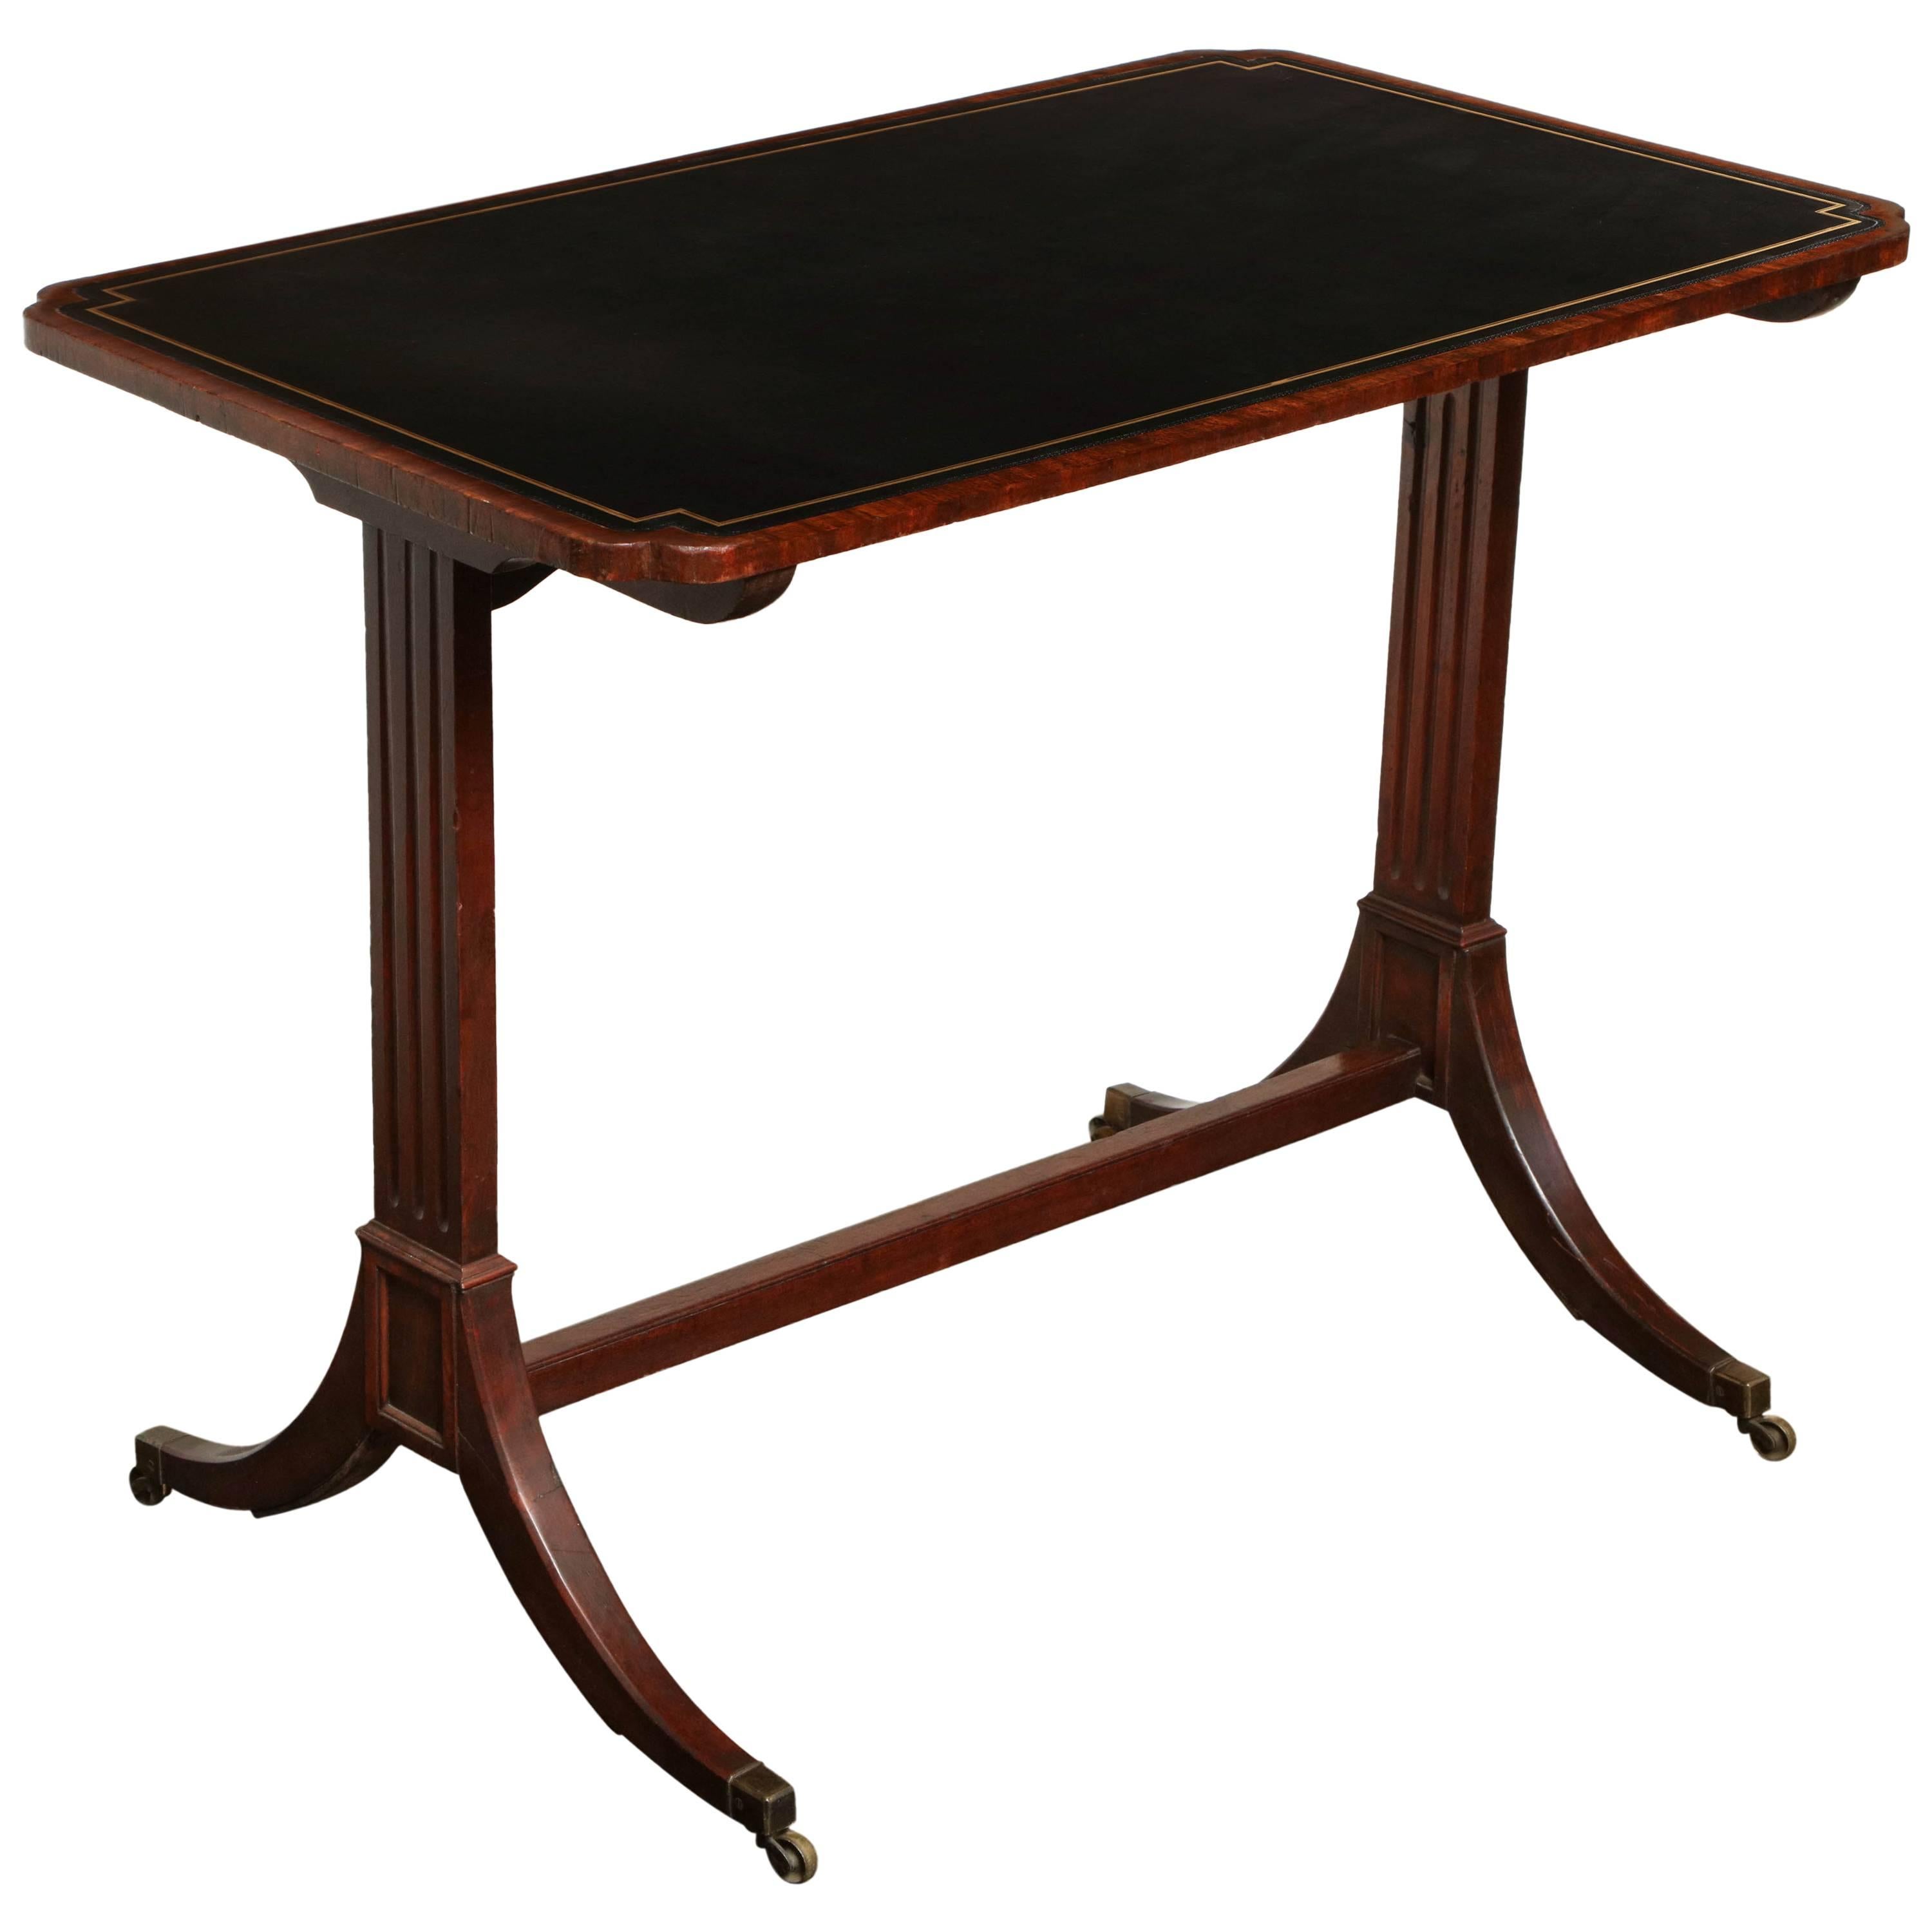 Early 19th Century English Regency Table with Leather Top